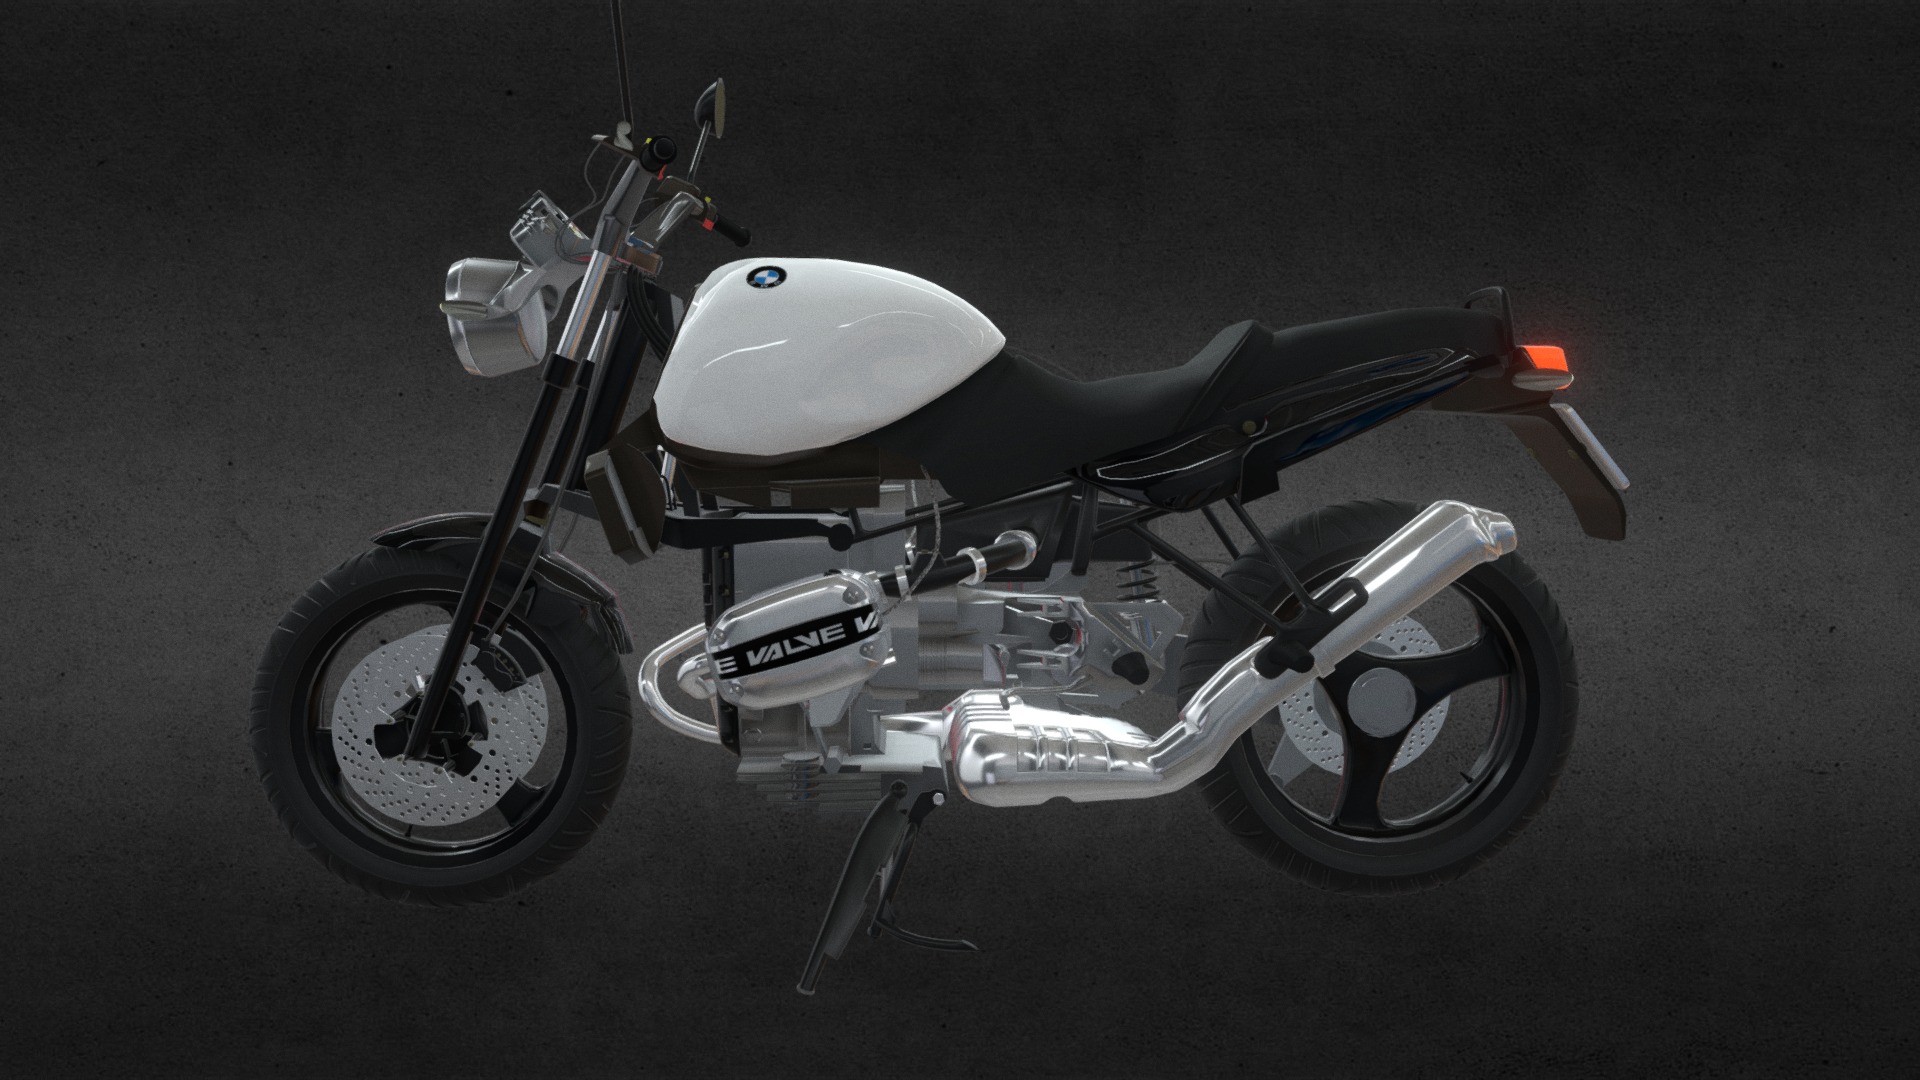 3D model BMW R1100 - This is a 3D model of the BMW R1100. The 3D model is about a motorcycle parked on pavement.